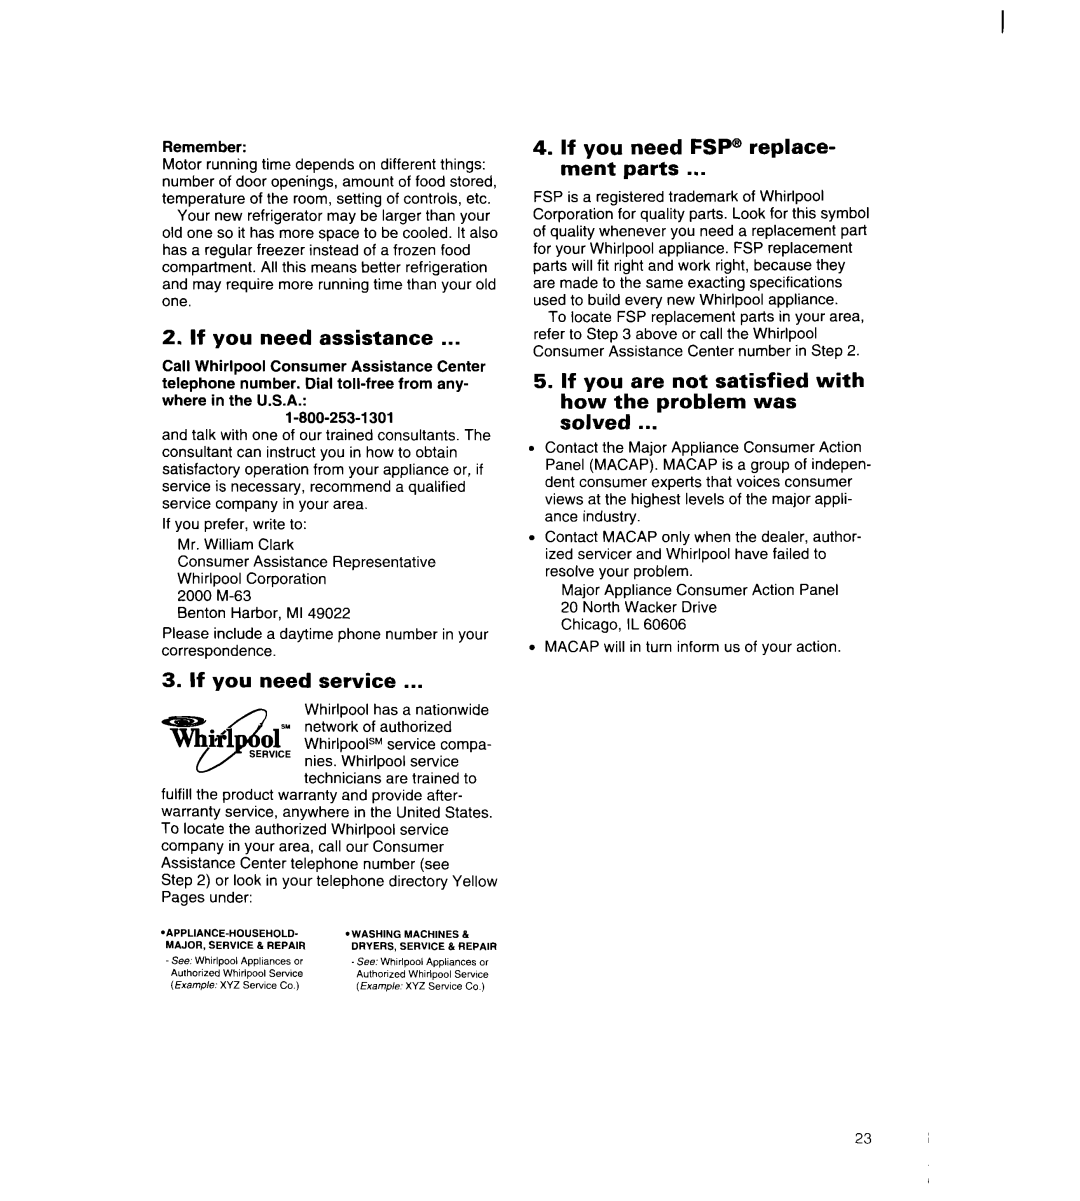 Whirlpool 8ED22PW manual If you need assistance, If you need service, If you need FSP@ replace- ment parts, TLfl 